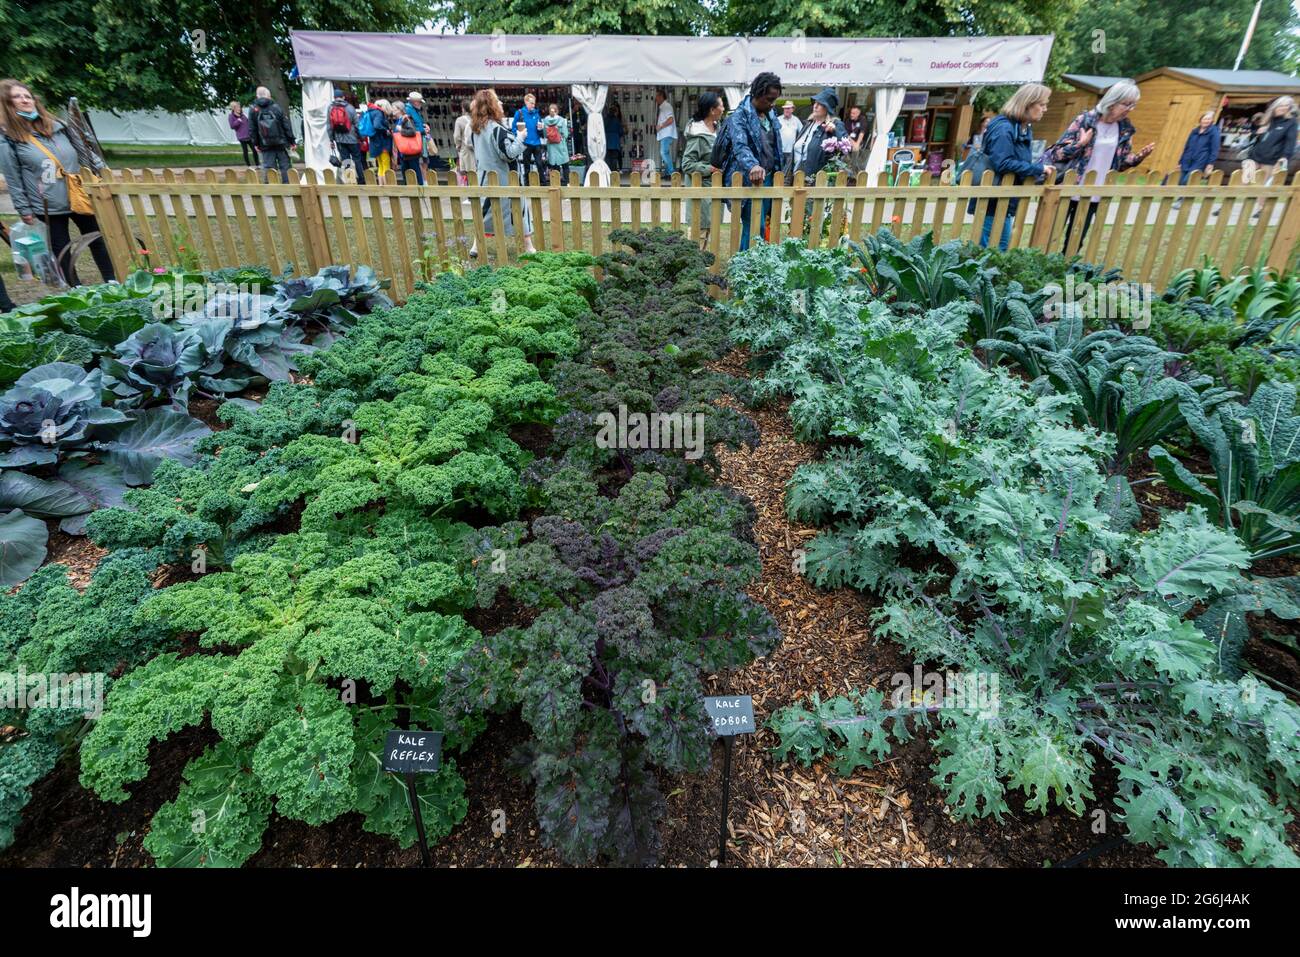 London, UK.  6 July 2021. Huge vegetables growing in the 'no dig' garden as the rescheduled RHS Hampton Court Palace Garden Festival opens to the public. No dig is a form of cultivation advocated by gardener Charles Dowding. Cancelled in 2020 due to the ongoing coronavirus pandemic, the world’s largest flower show includes gardens from inspiring designers, celebrity talks, demonstrations and workshops.  Visitors to the show are required to observe Covid-19 protocols.  Credit: Stephen Chung / Alamy Live News Stock Photo